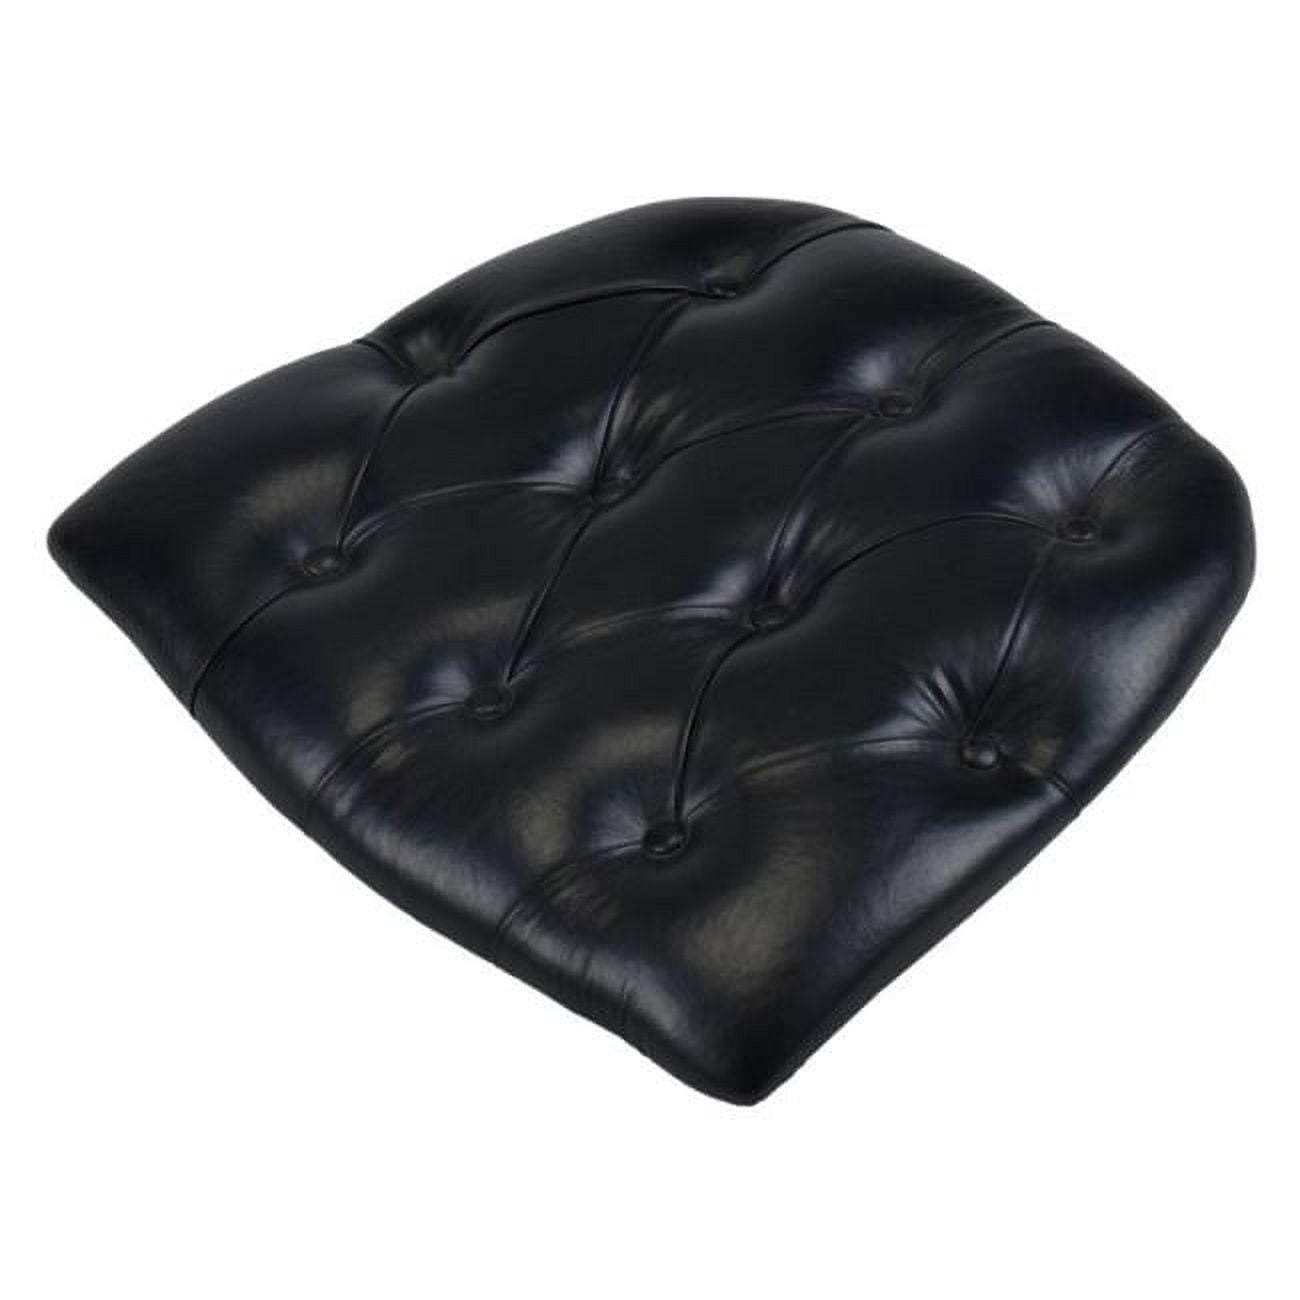 Cup-v-tufted-bk-web4 Indoor & Outdoor Black Tufted Vinyl Cushions, Set Of 4 - 2 X 16 X 16 In.